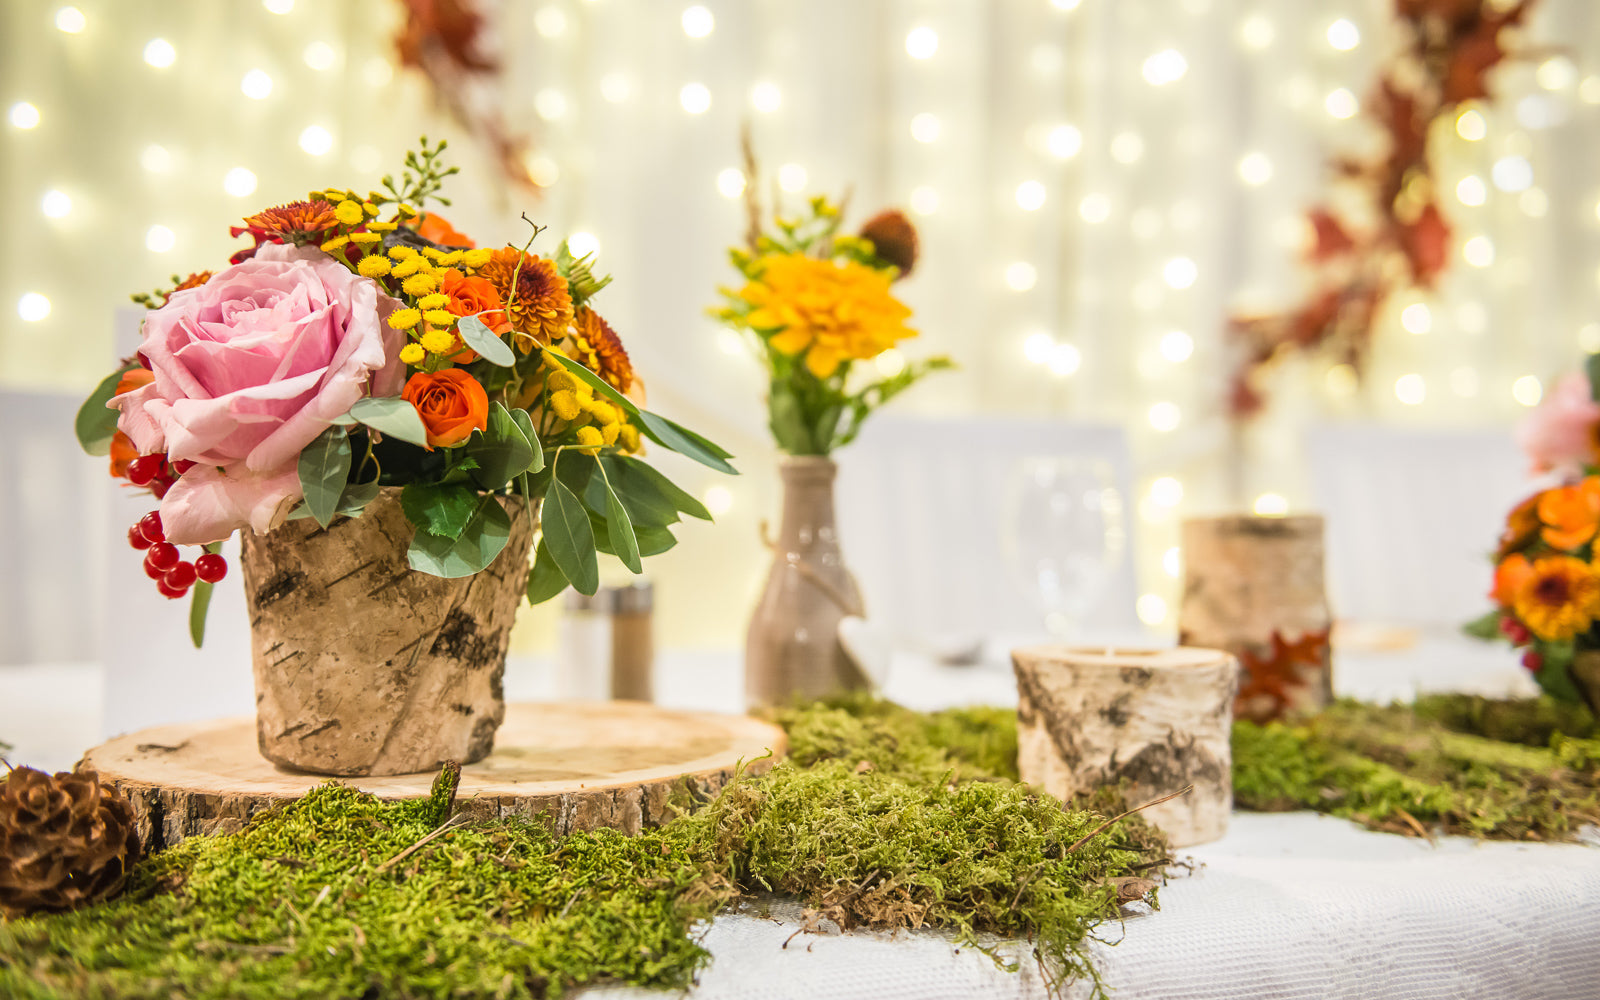 20 Amazing Hanging Greenery Floral Wedding Decorations for Your